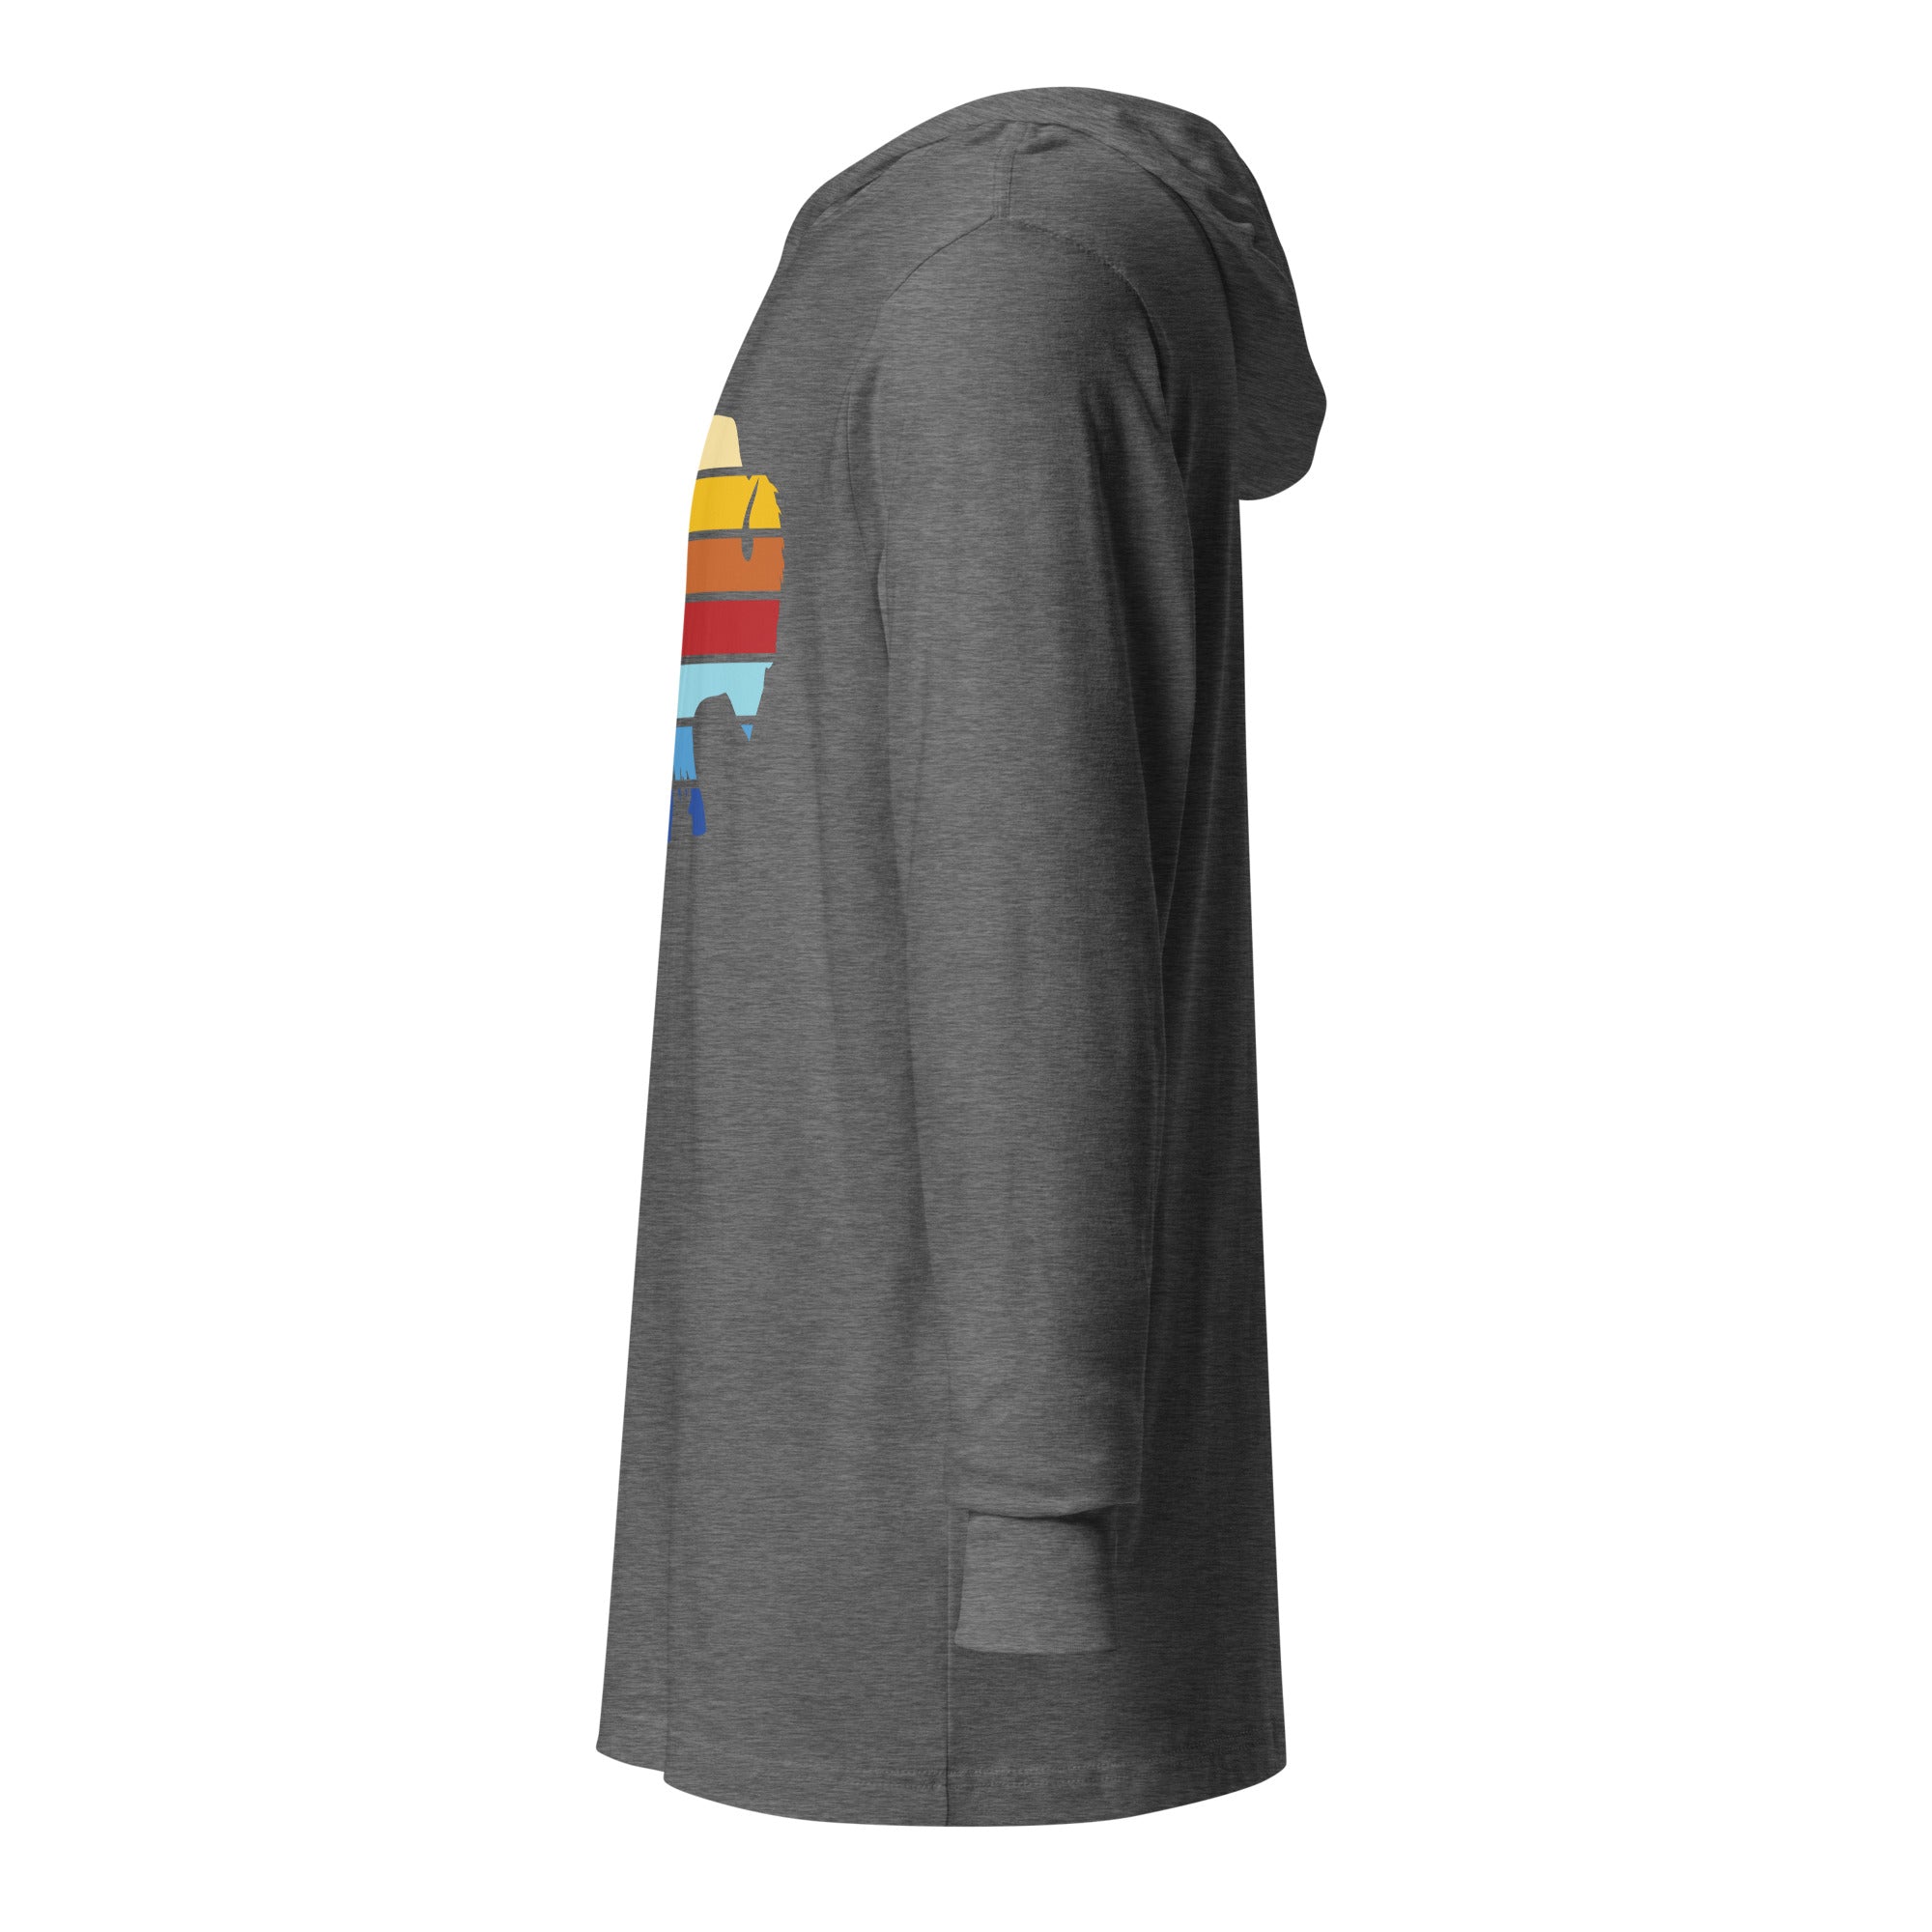 Liberty Maniacs Independent Bison Stack Hooded Long-Sleeve Tee